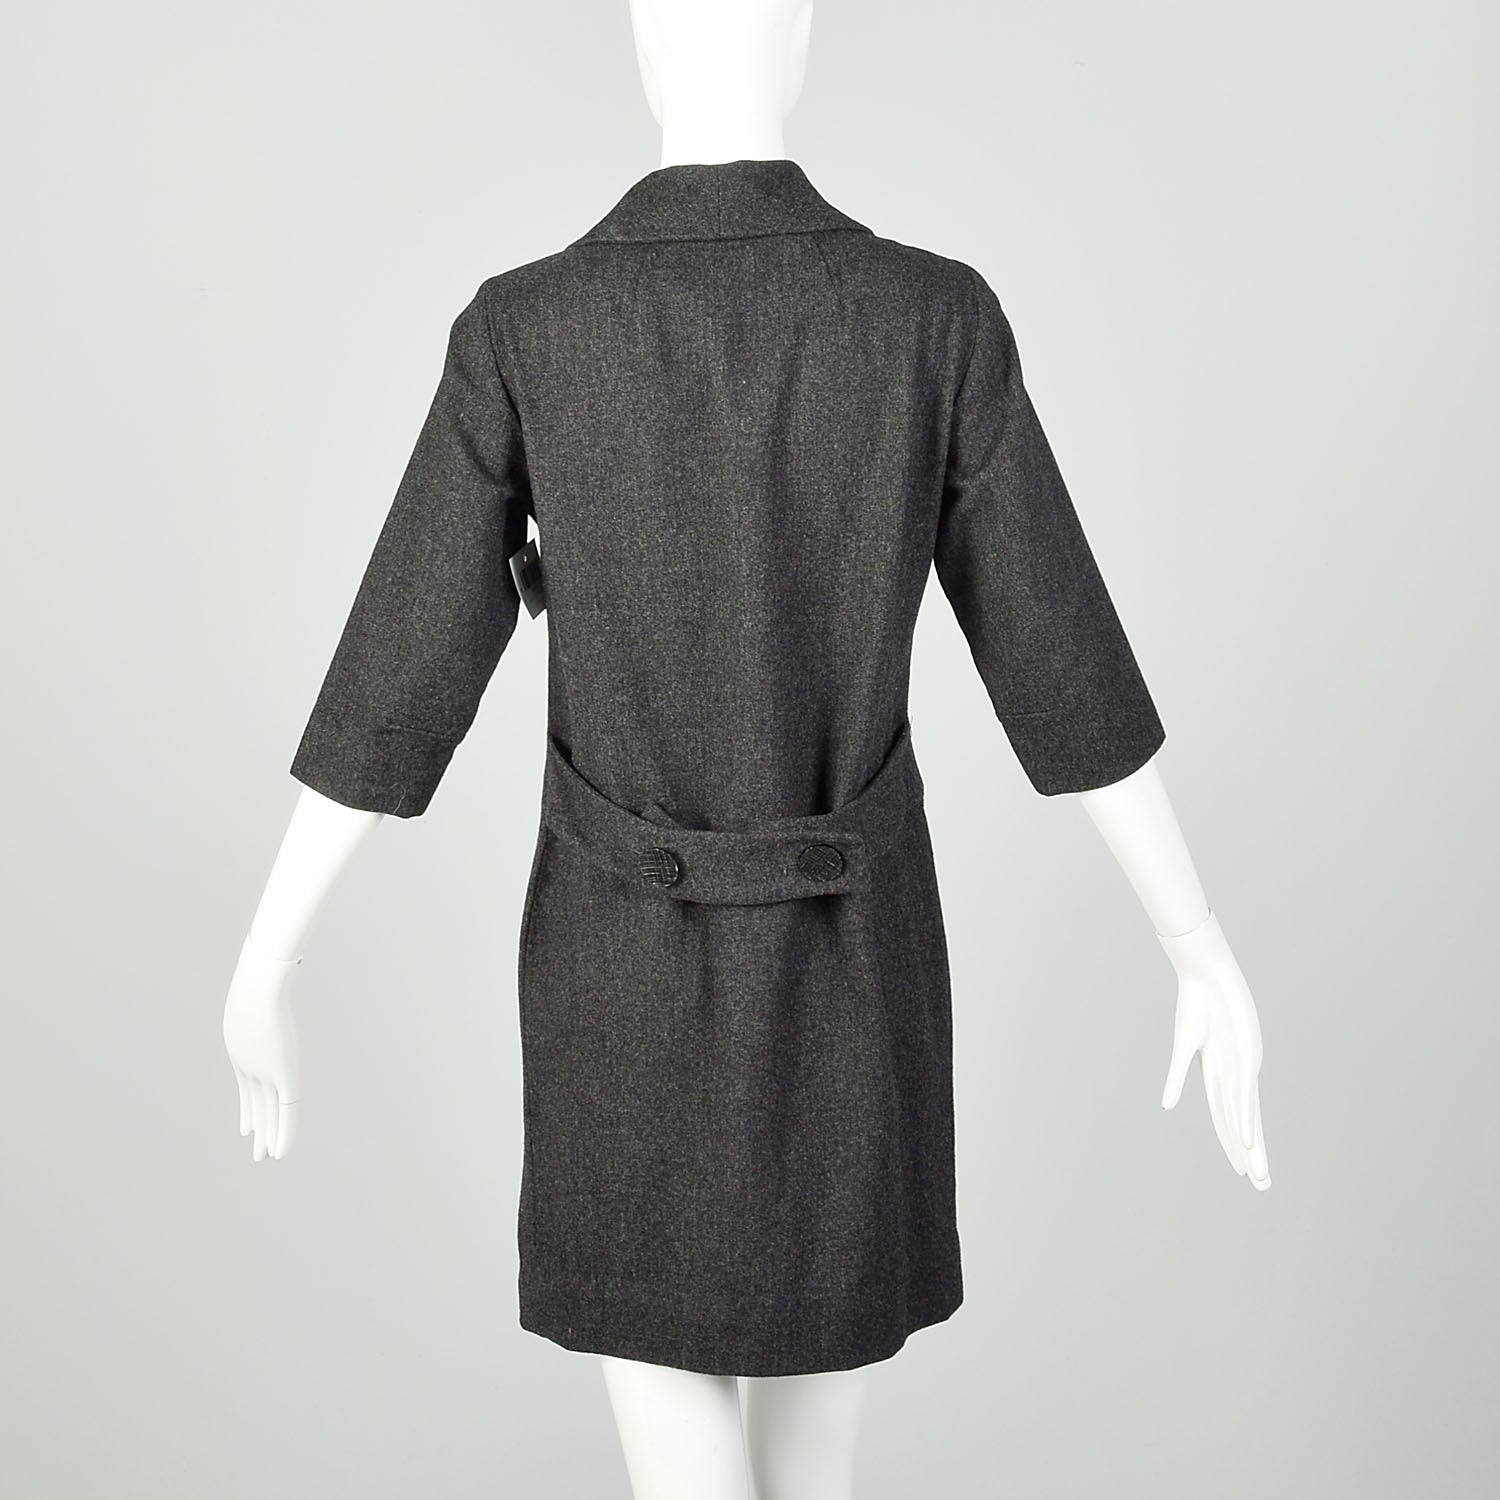 Medium 1960s Wool Dress Gray Double Breasted Casual